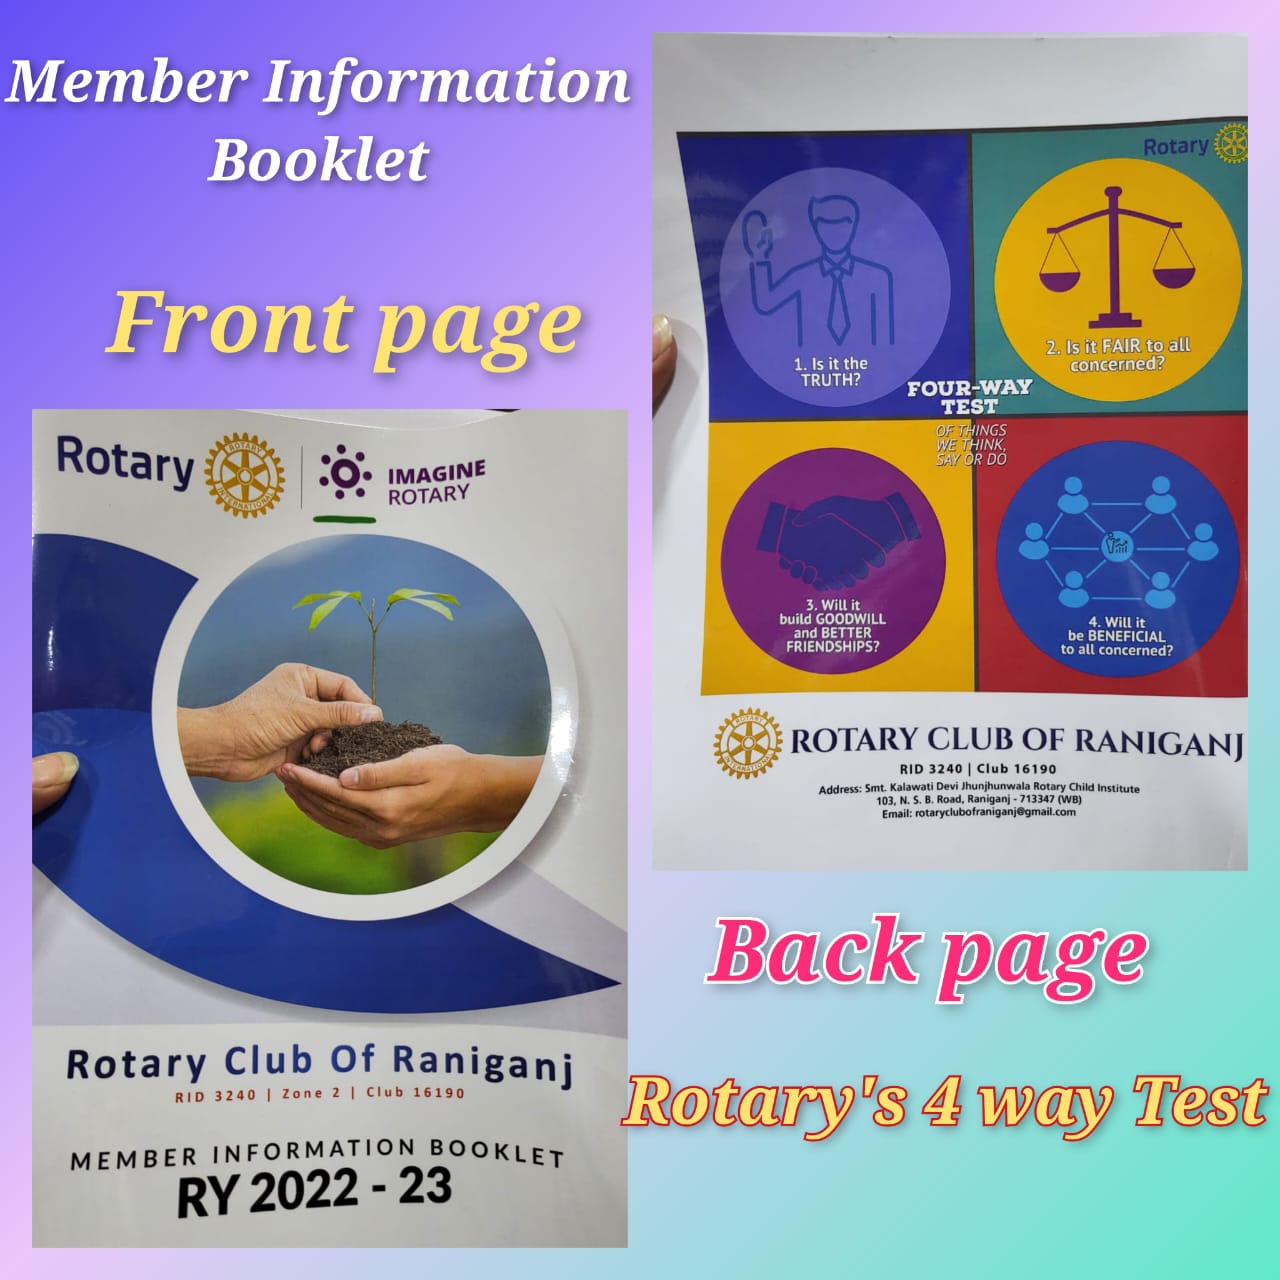 Distribution of Members Information Books imprinted with The Rotary’s 4 Way Test on back page to our club members